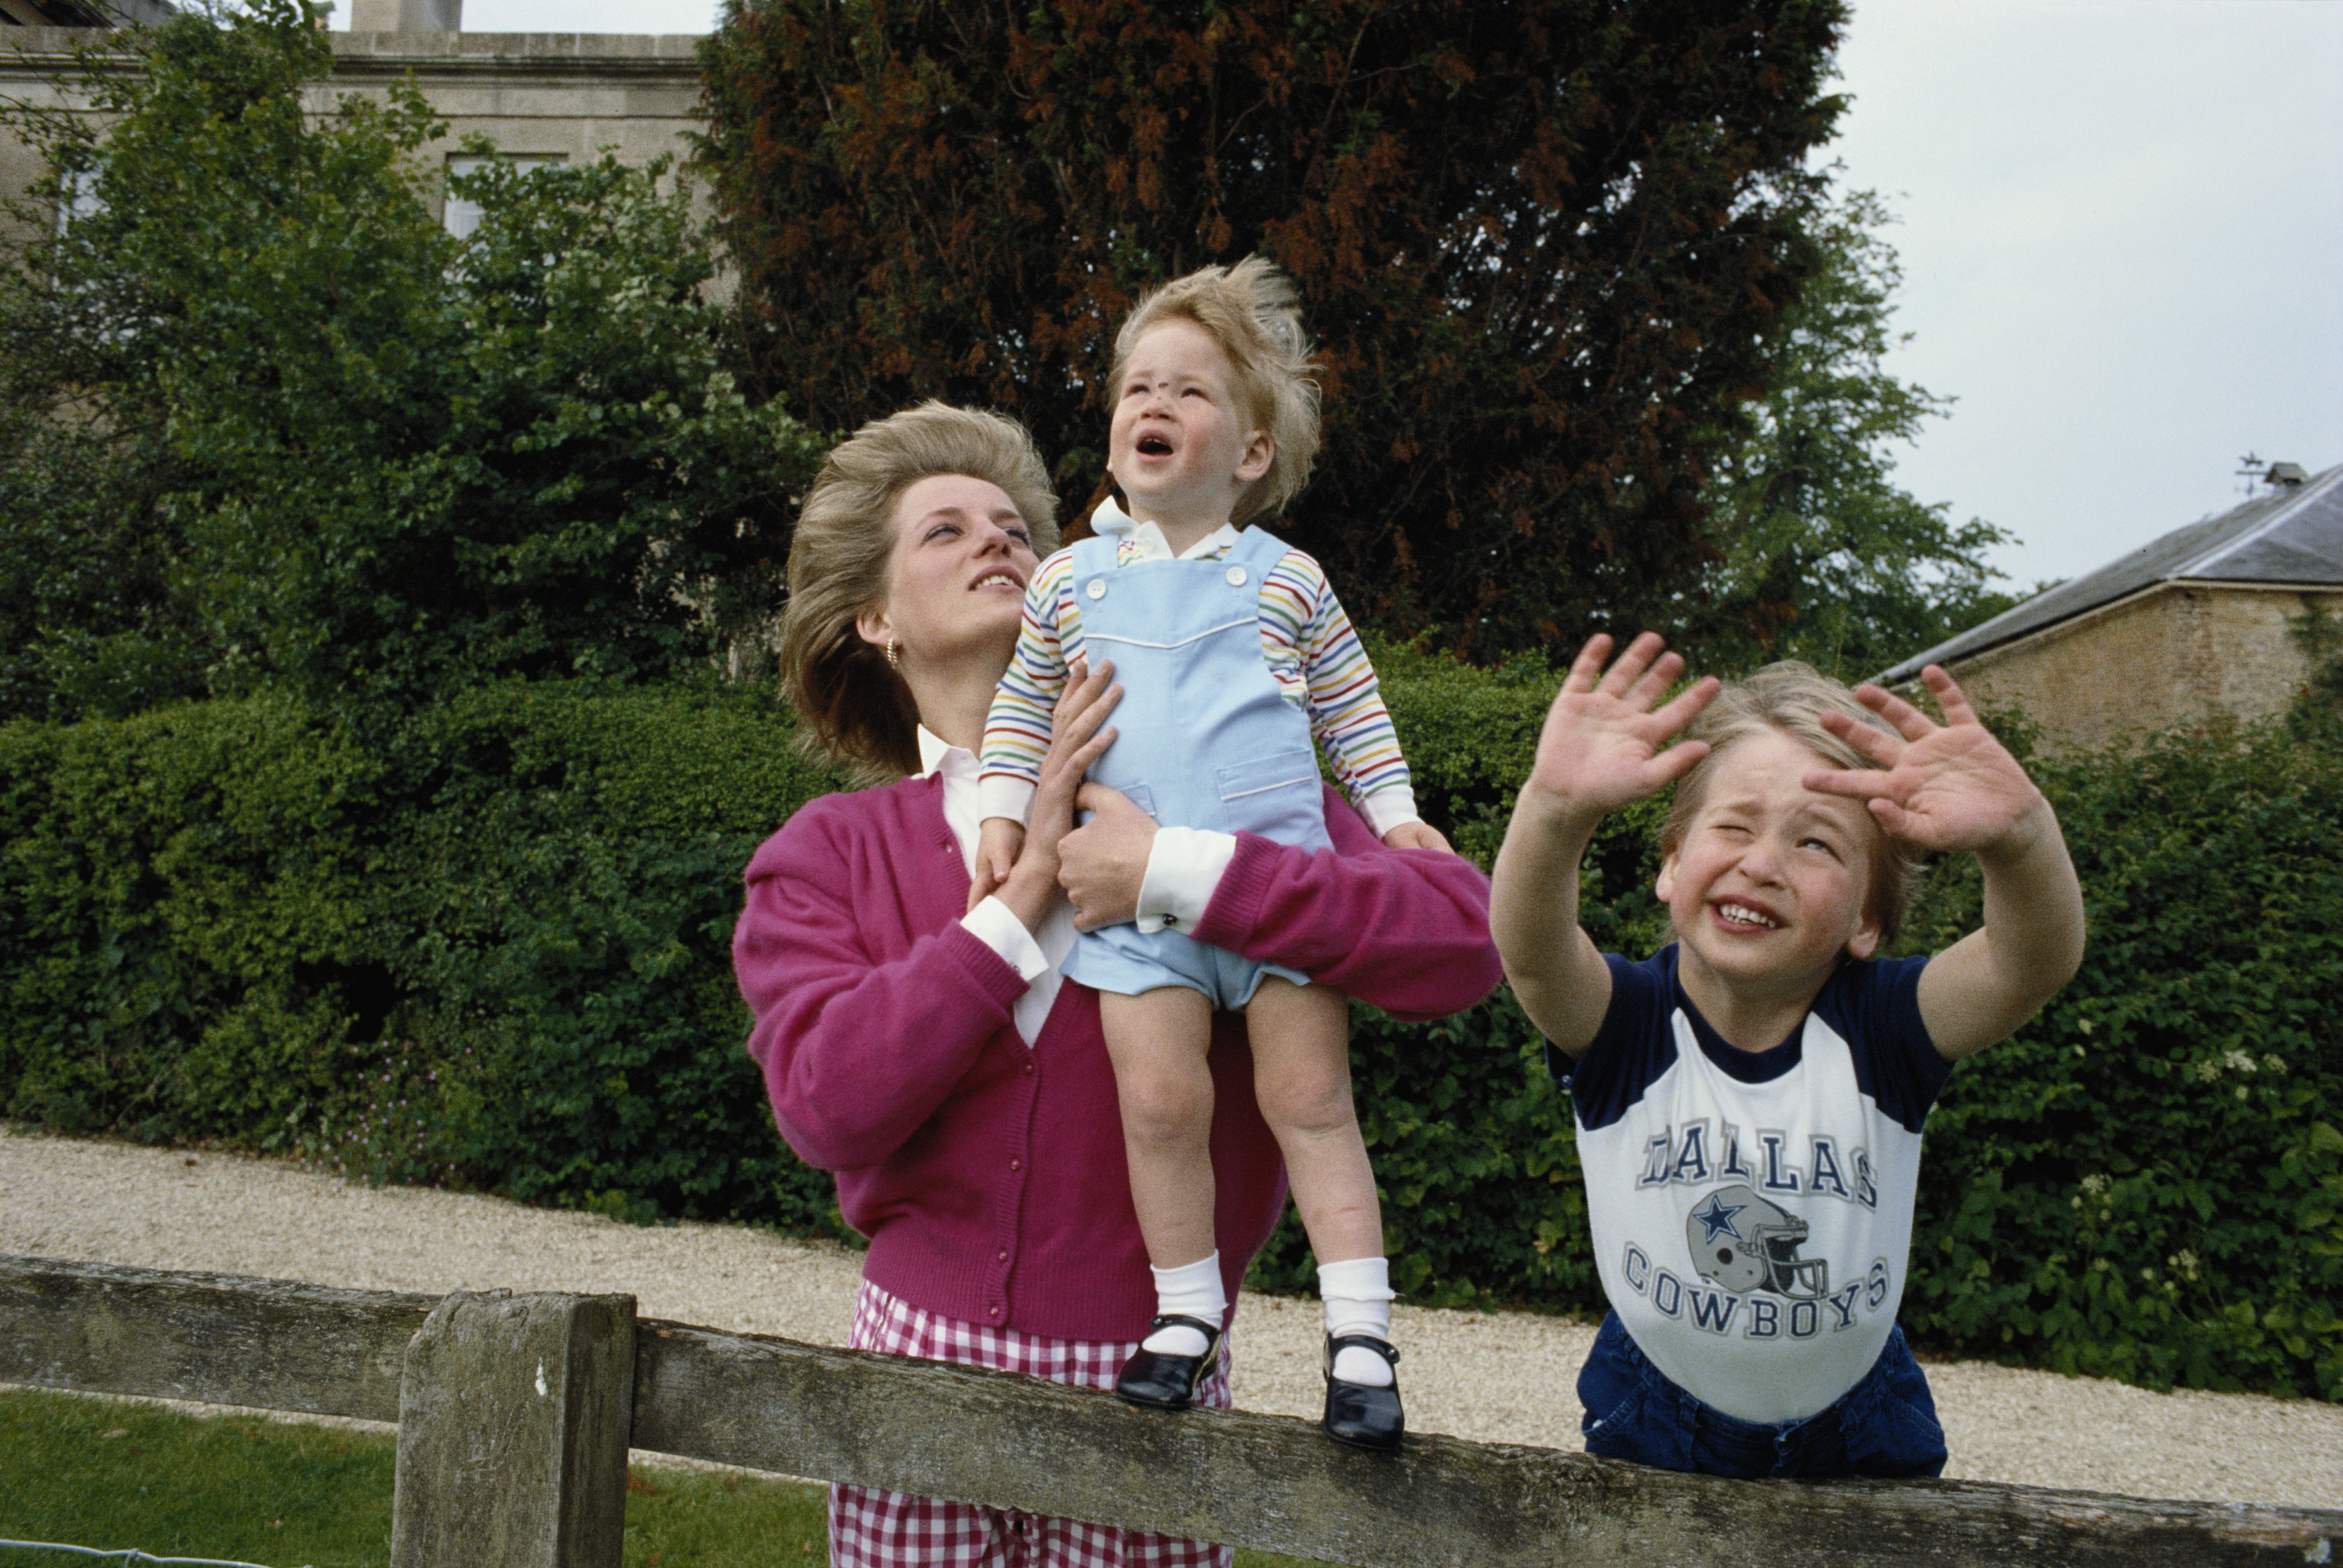 Princess Diana and her sons, Prince William and Prince Harry, in the garden of Highgrove House in Gloucestershire, on July 18, 1986. | Source: Getty Images